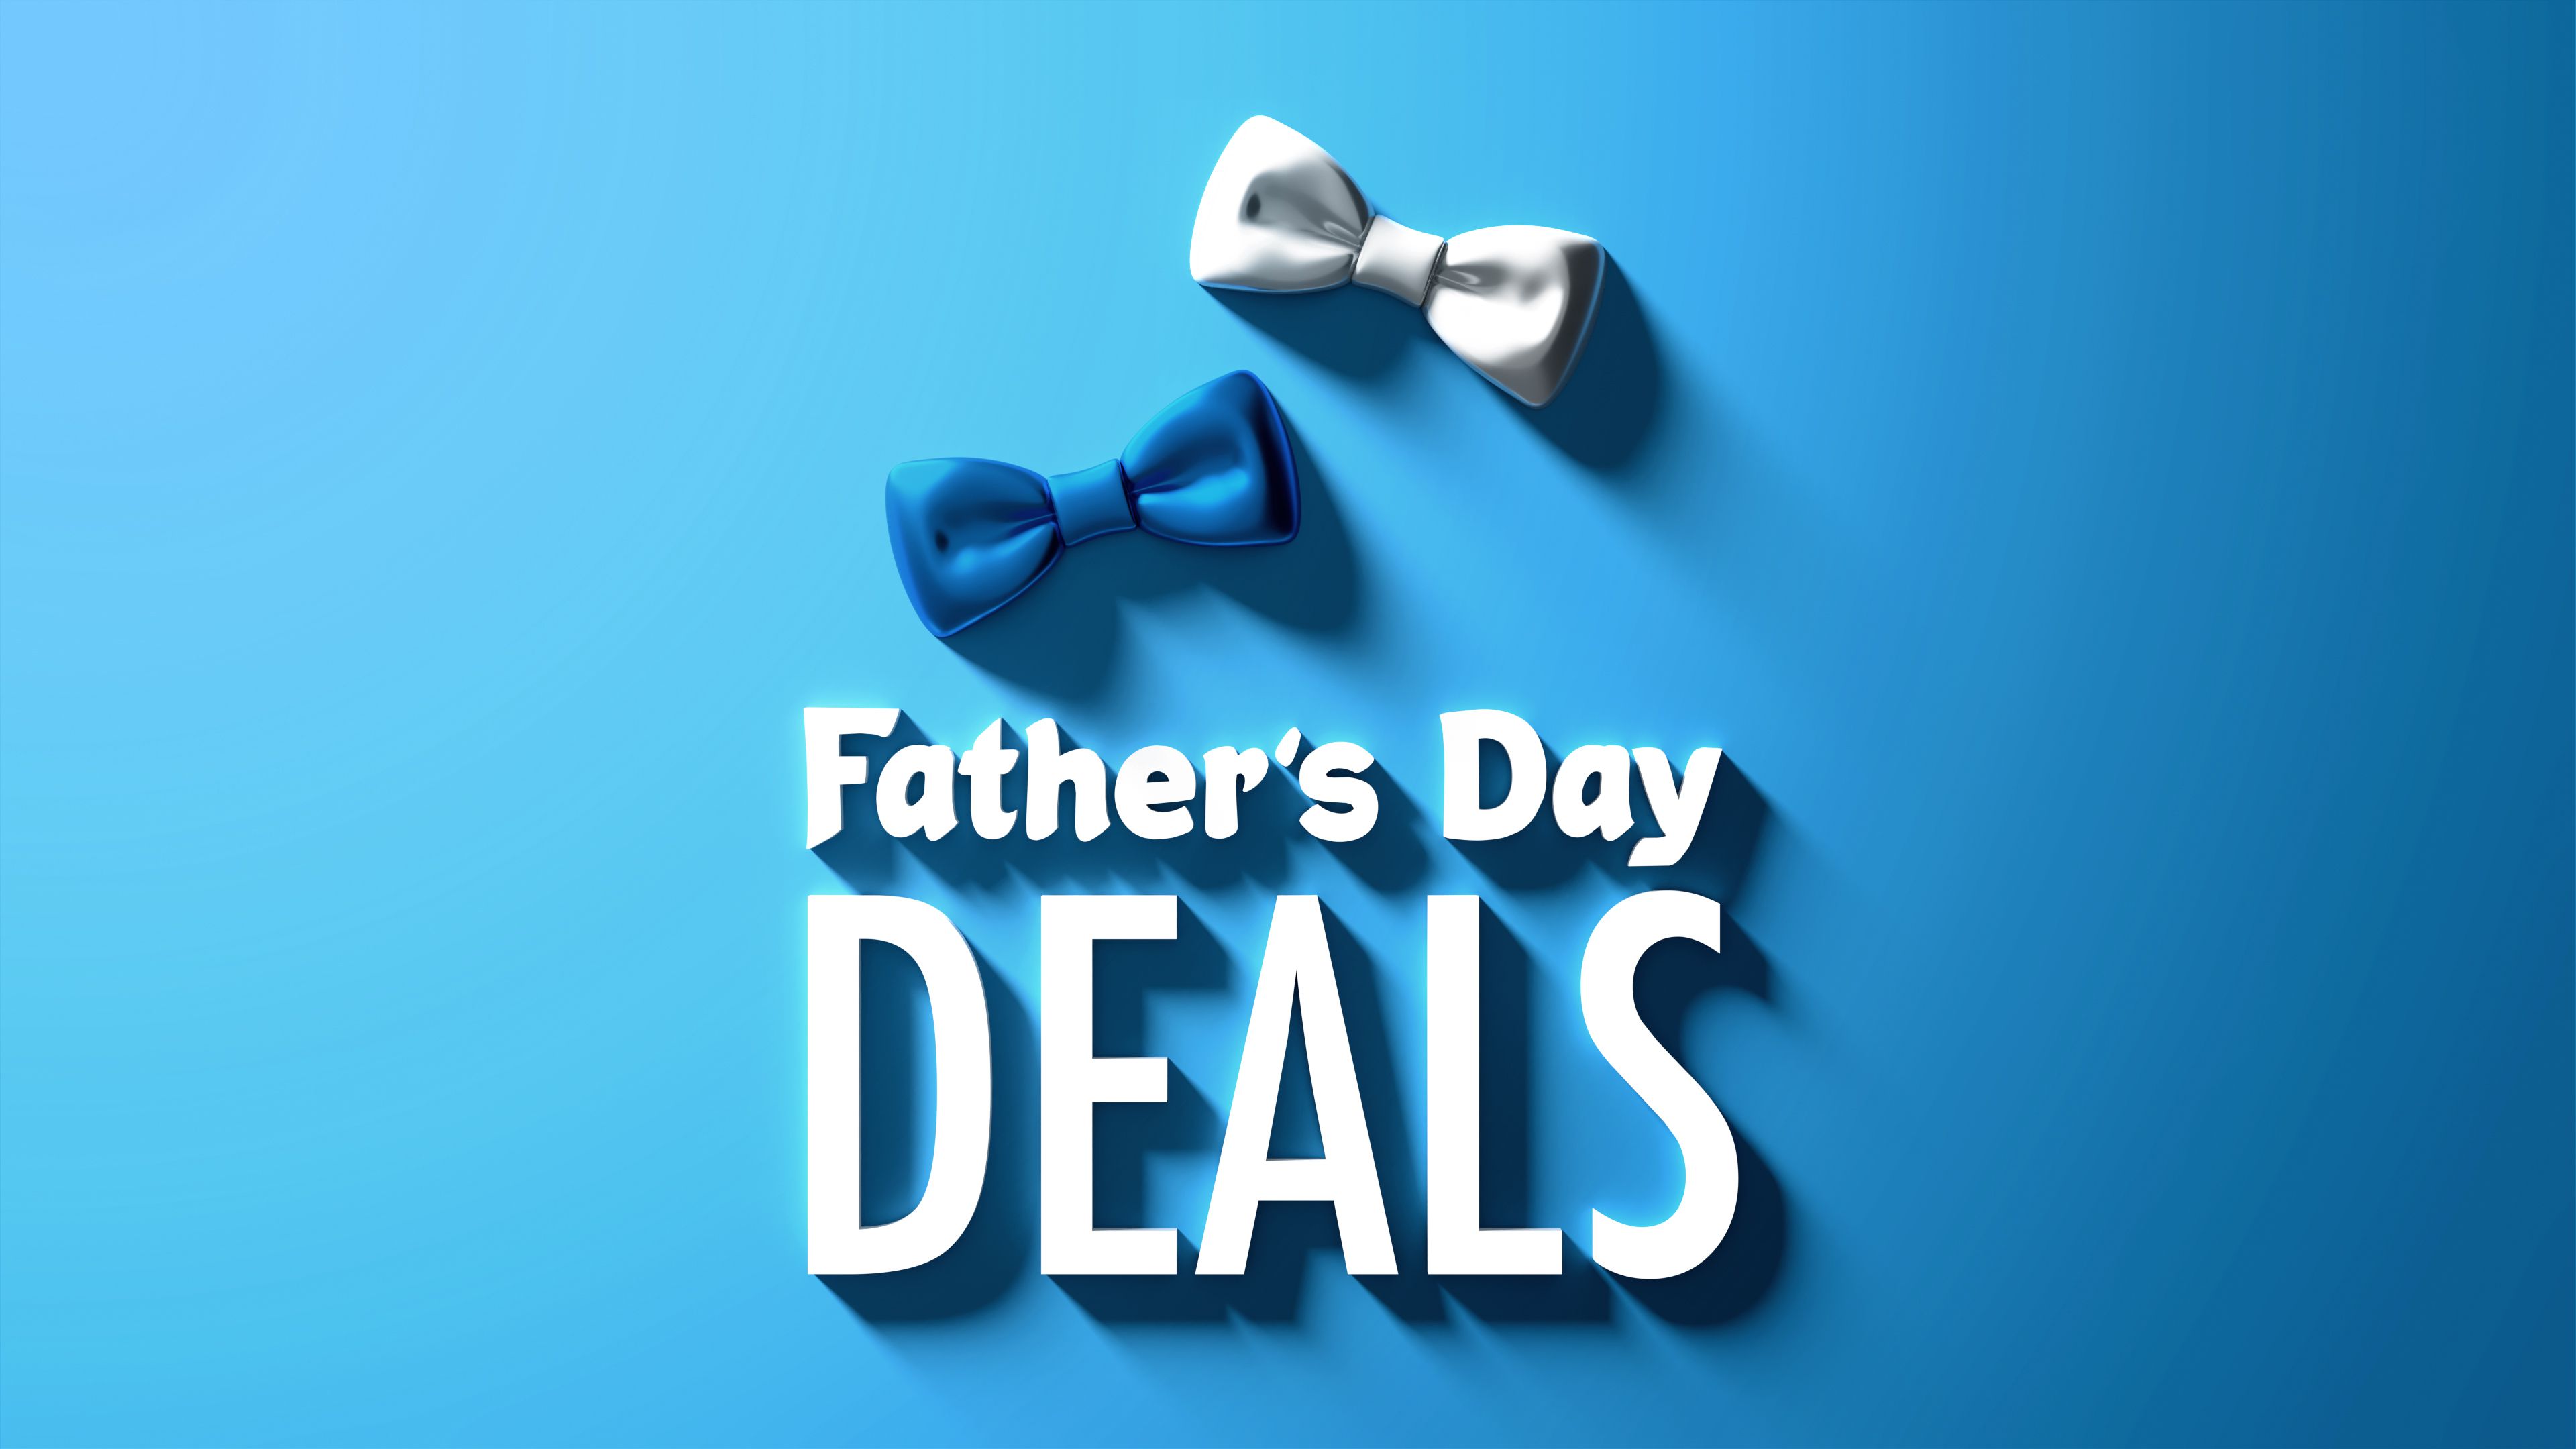 Father's Day Deals: The Best Apple Accessory Sales From Sonos, Brydge, eBay, Mor..